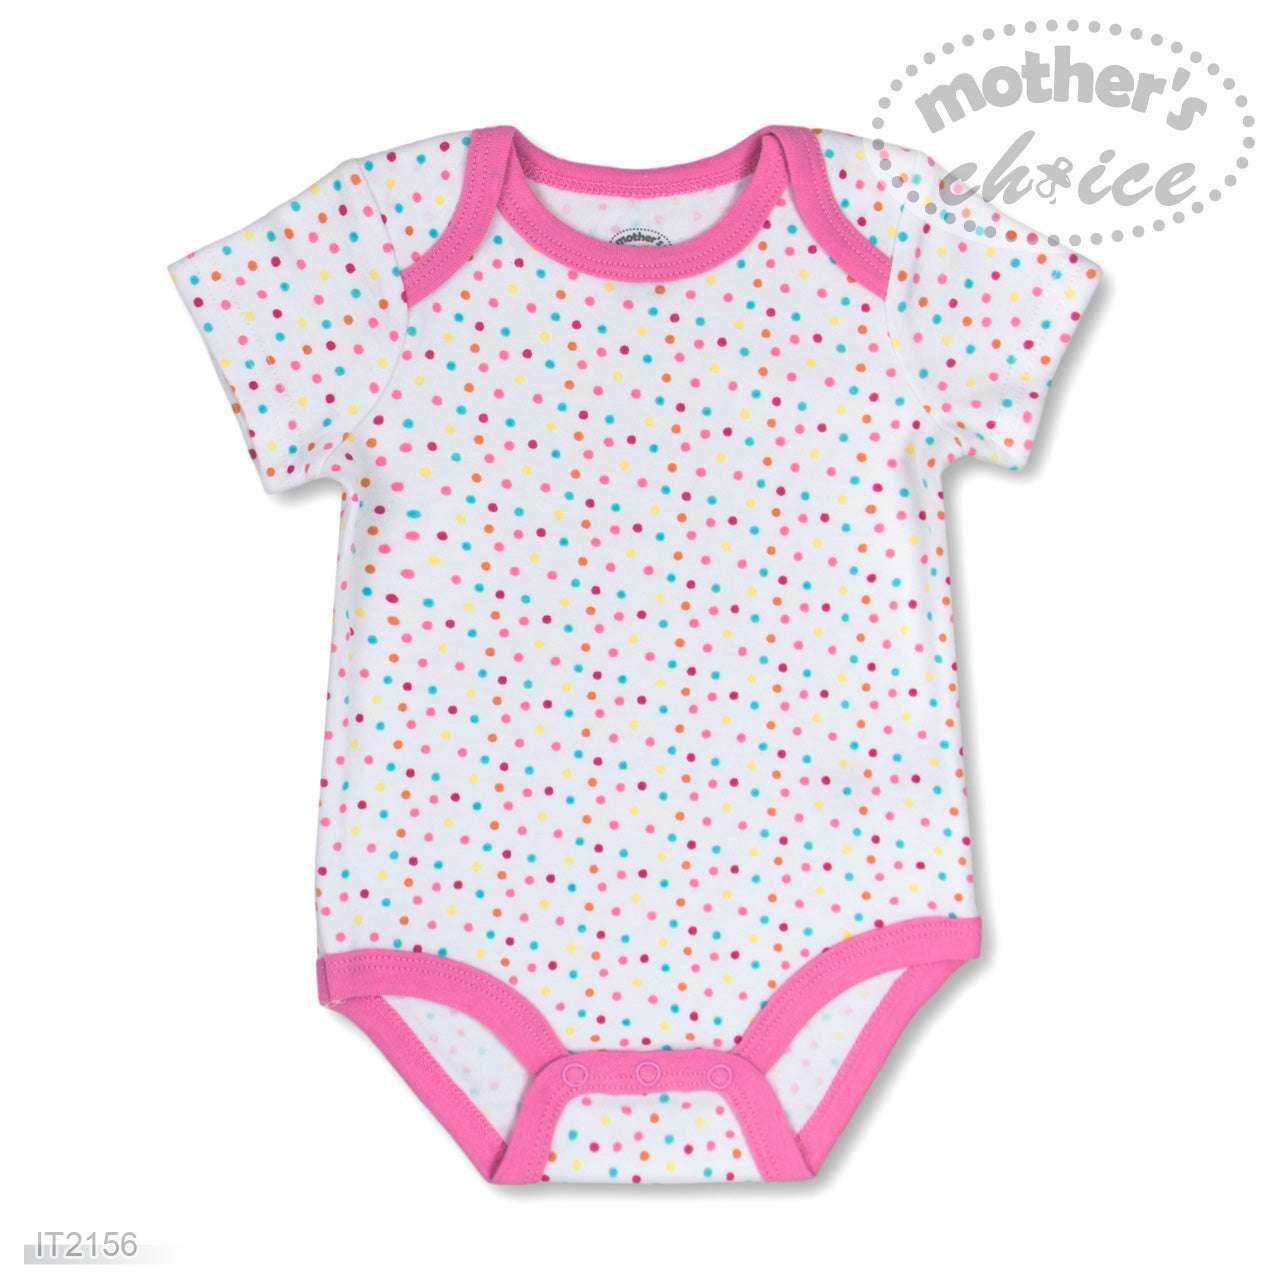 Mother's Choice 5 Pack Short Sleeve Onesie (Smile and Giggle/IT2156)